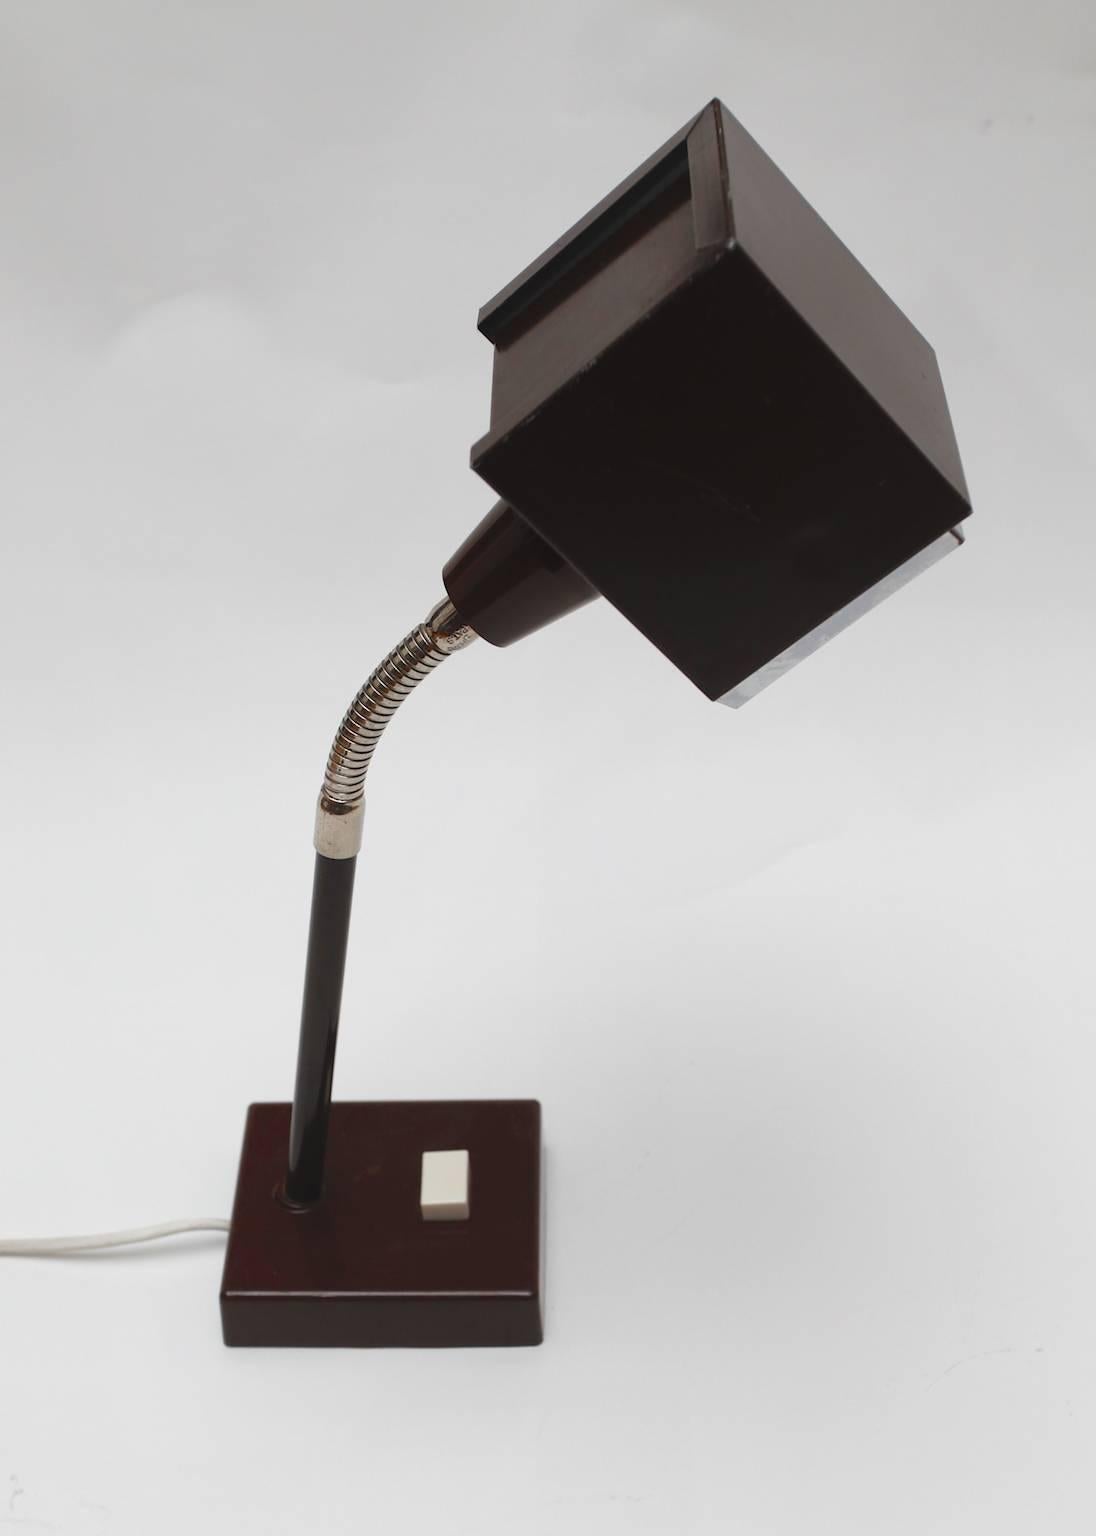 Brown table lamp, Elidus by Hans-Agne Jakobsson, Markaryd, Sweden.
The grid in front of the bulb is removable (see images).
Full metal body, bendable neck. The size is 41 cm high and the foot is 10 x 11 cm.
We also have the same lamp in red.